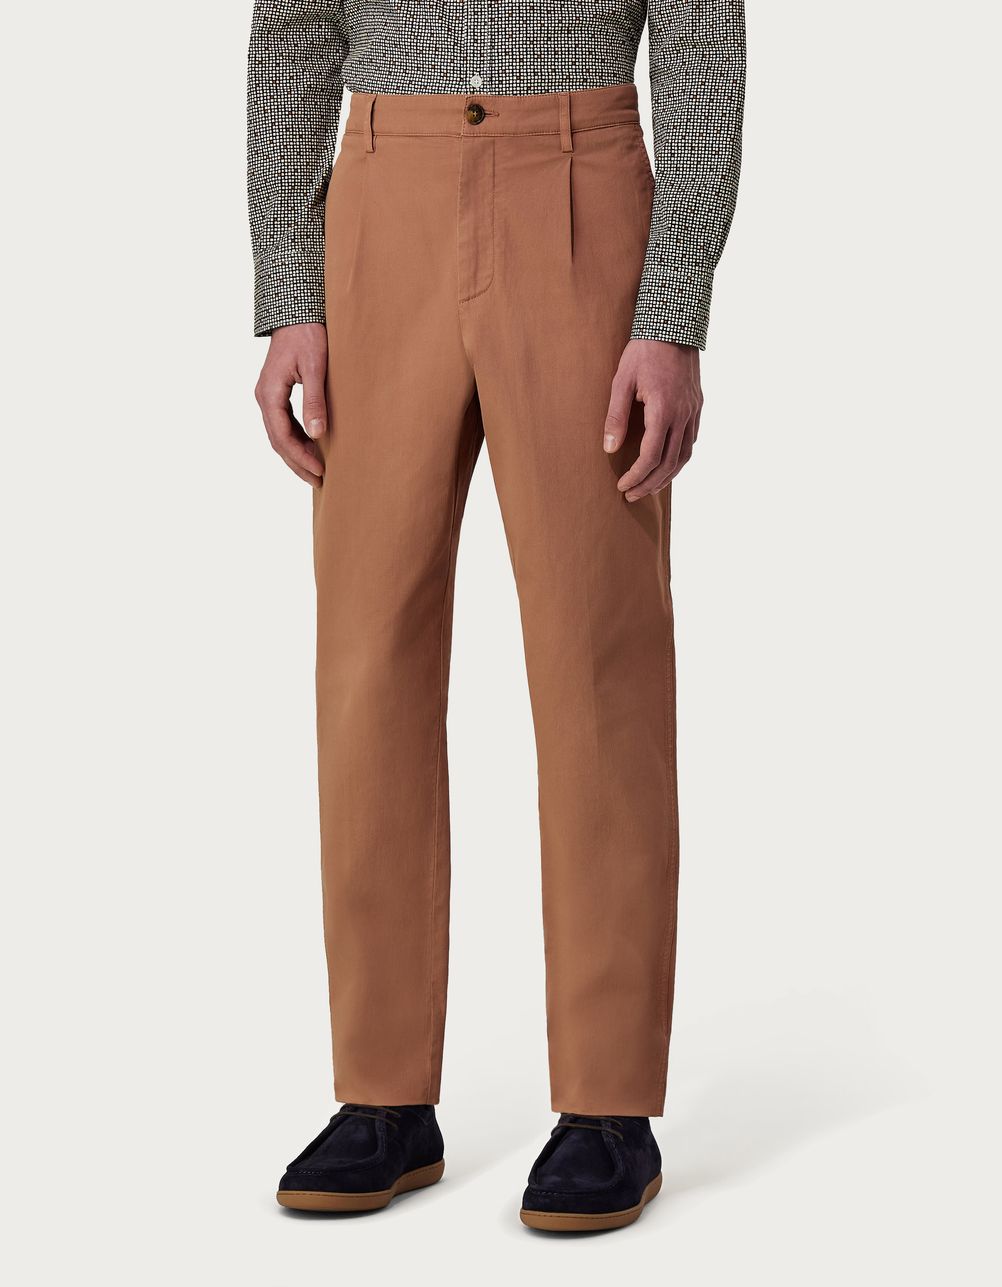 Relxaed-fit chinos in cinnamon garment-dyed cotton grosgrain